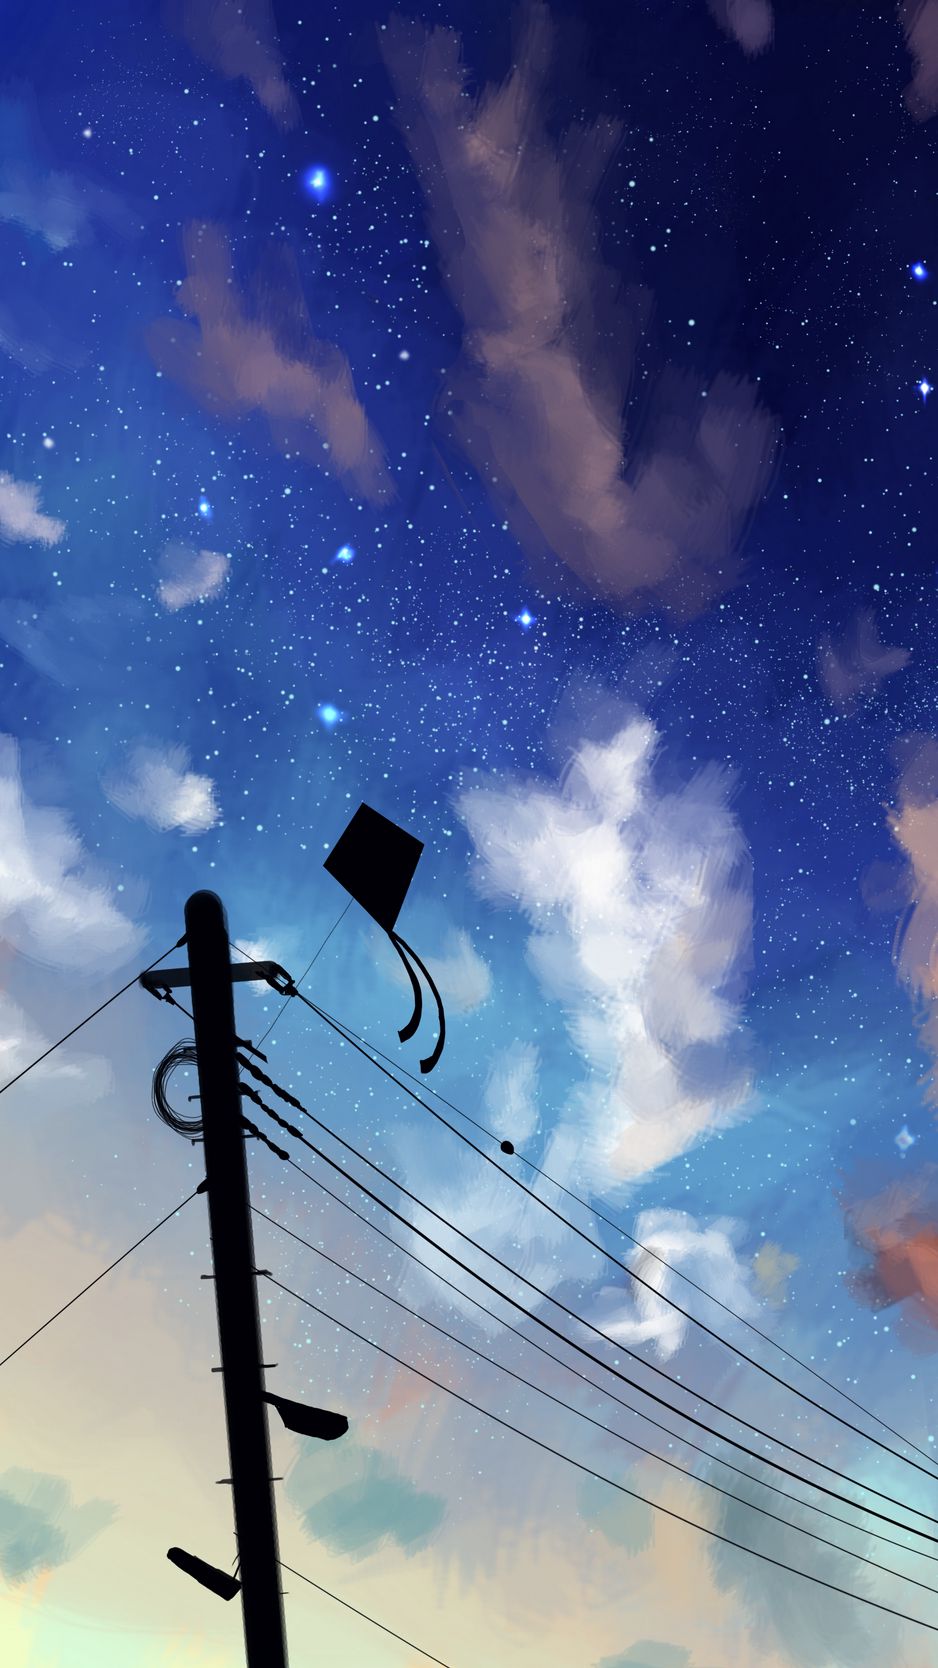 Download wallpaper 938x1668 kite, wires, night, sky, clouds iphone 8/7/6s/6  for parallax hd background